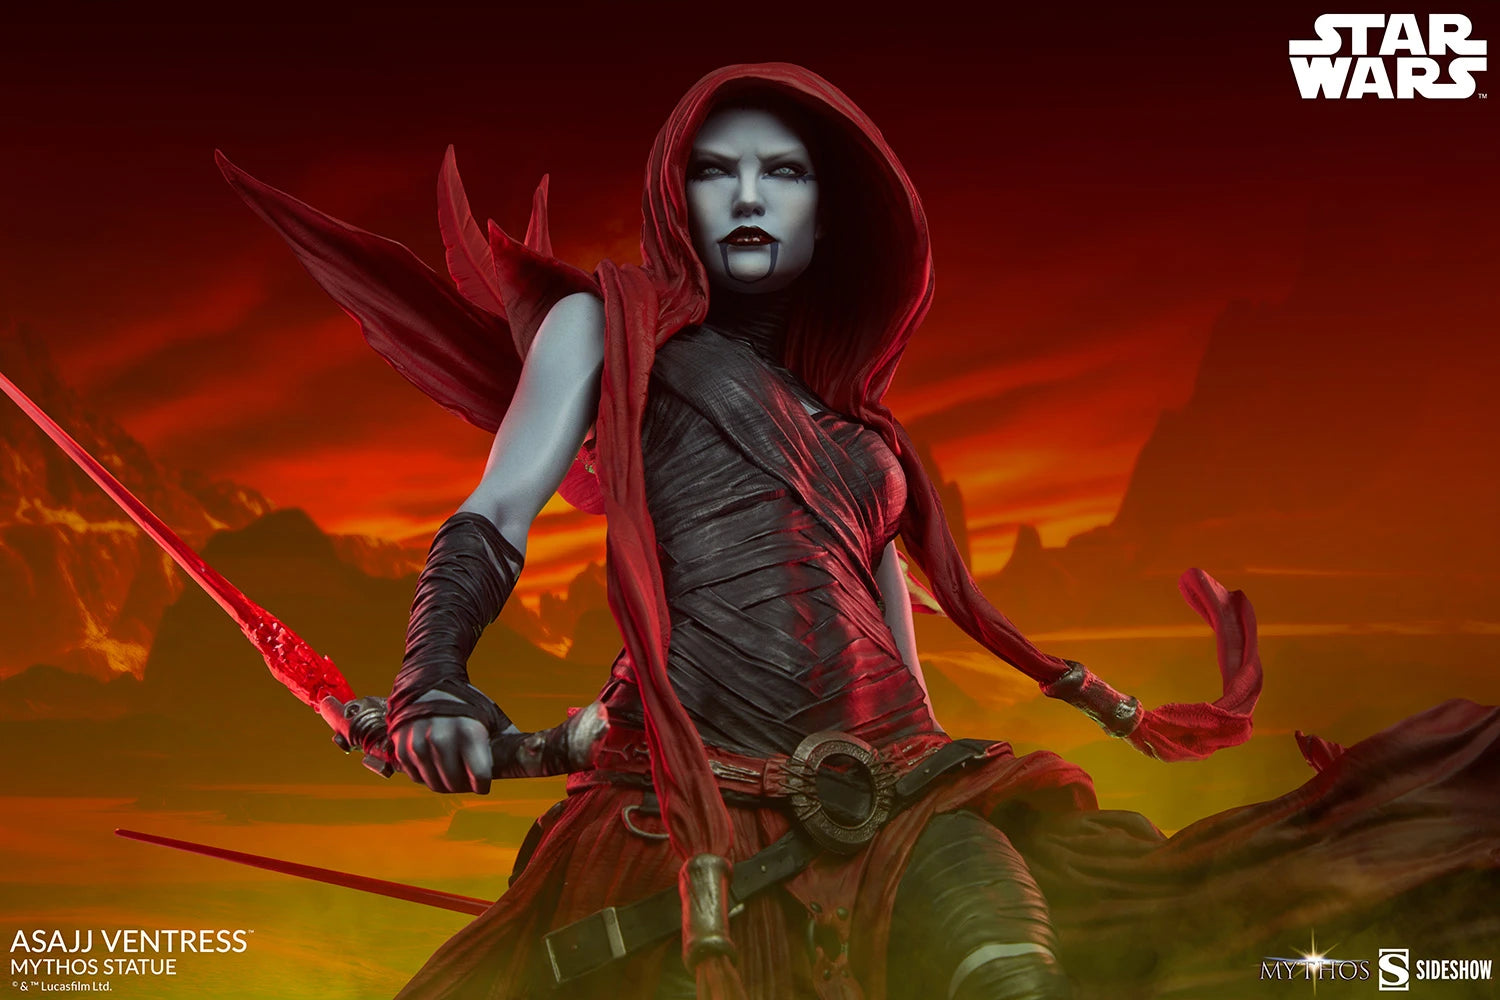 ASAJJ VENTRESS MYTHOS Statue by Sideshow Collectibles